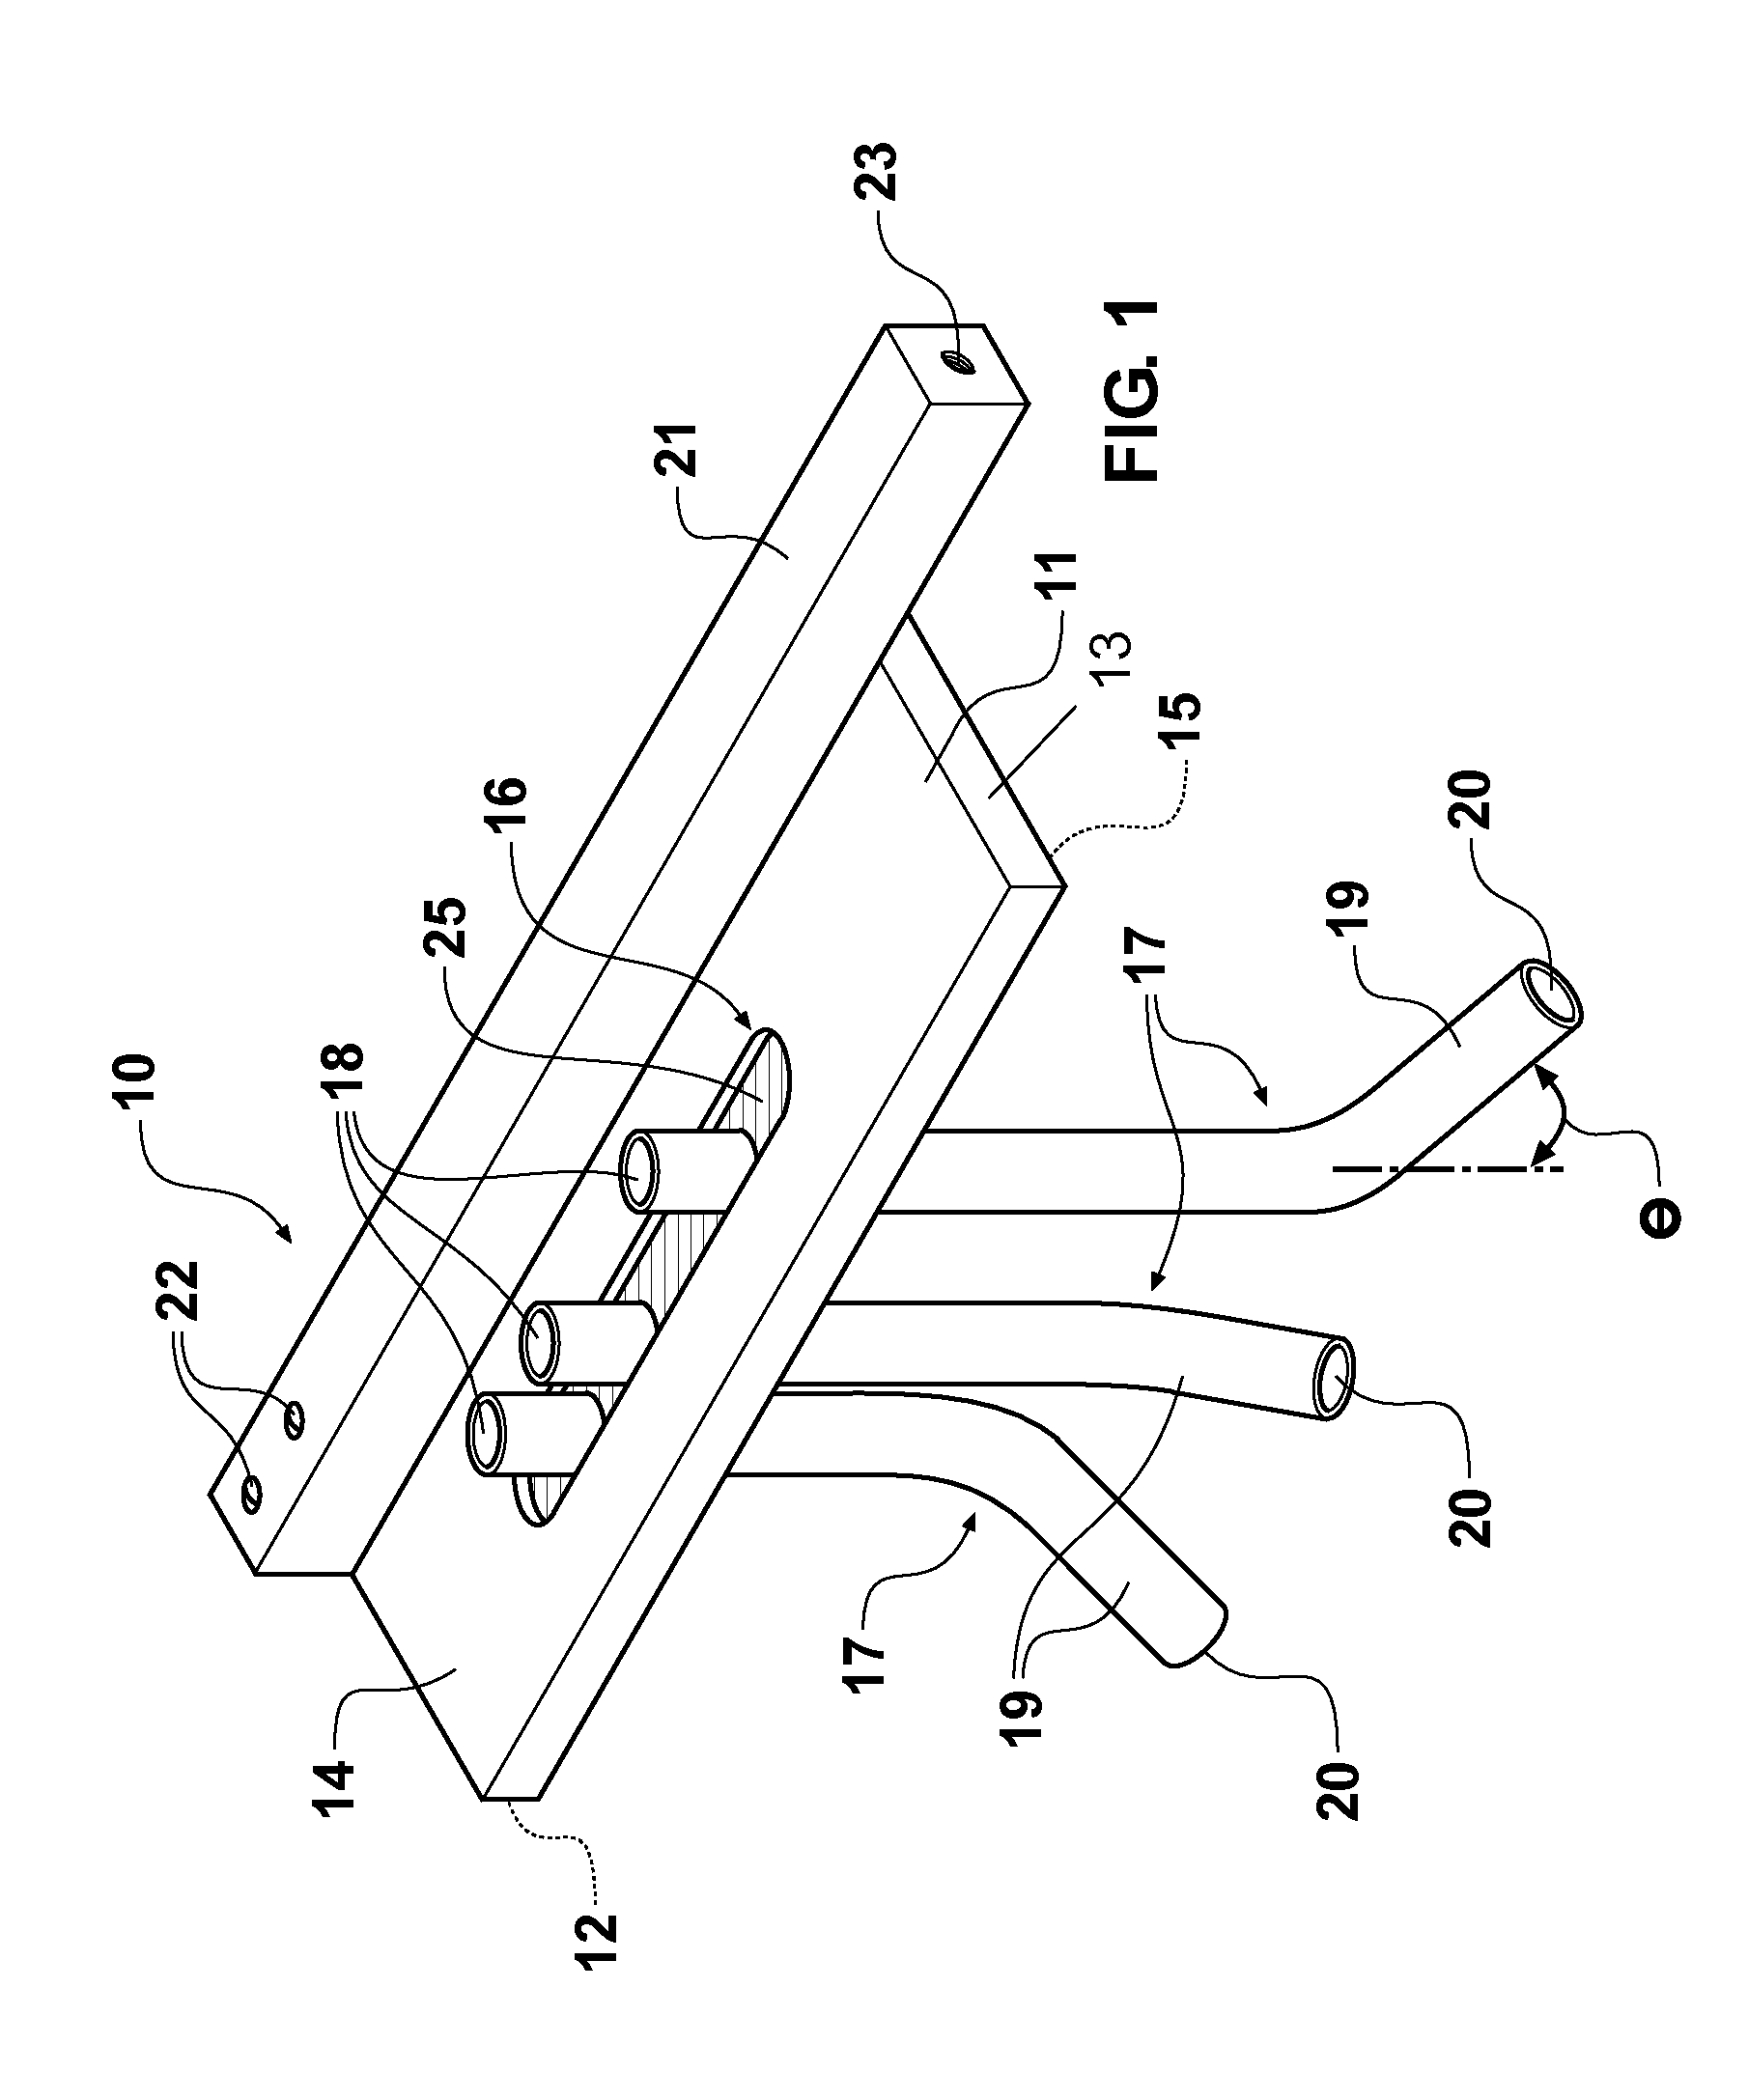 Particle separation devices, methods and systems